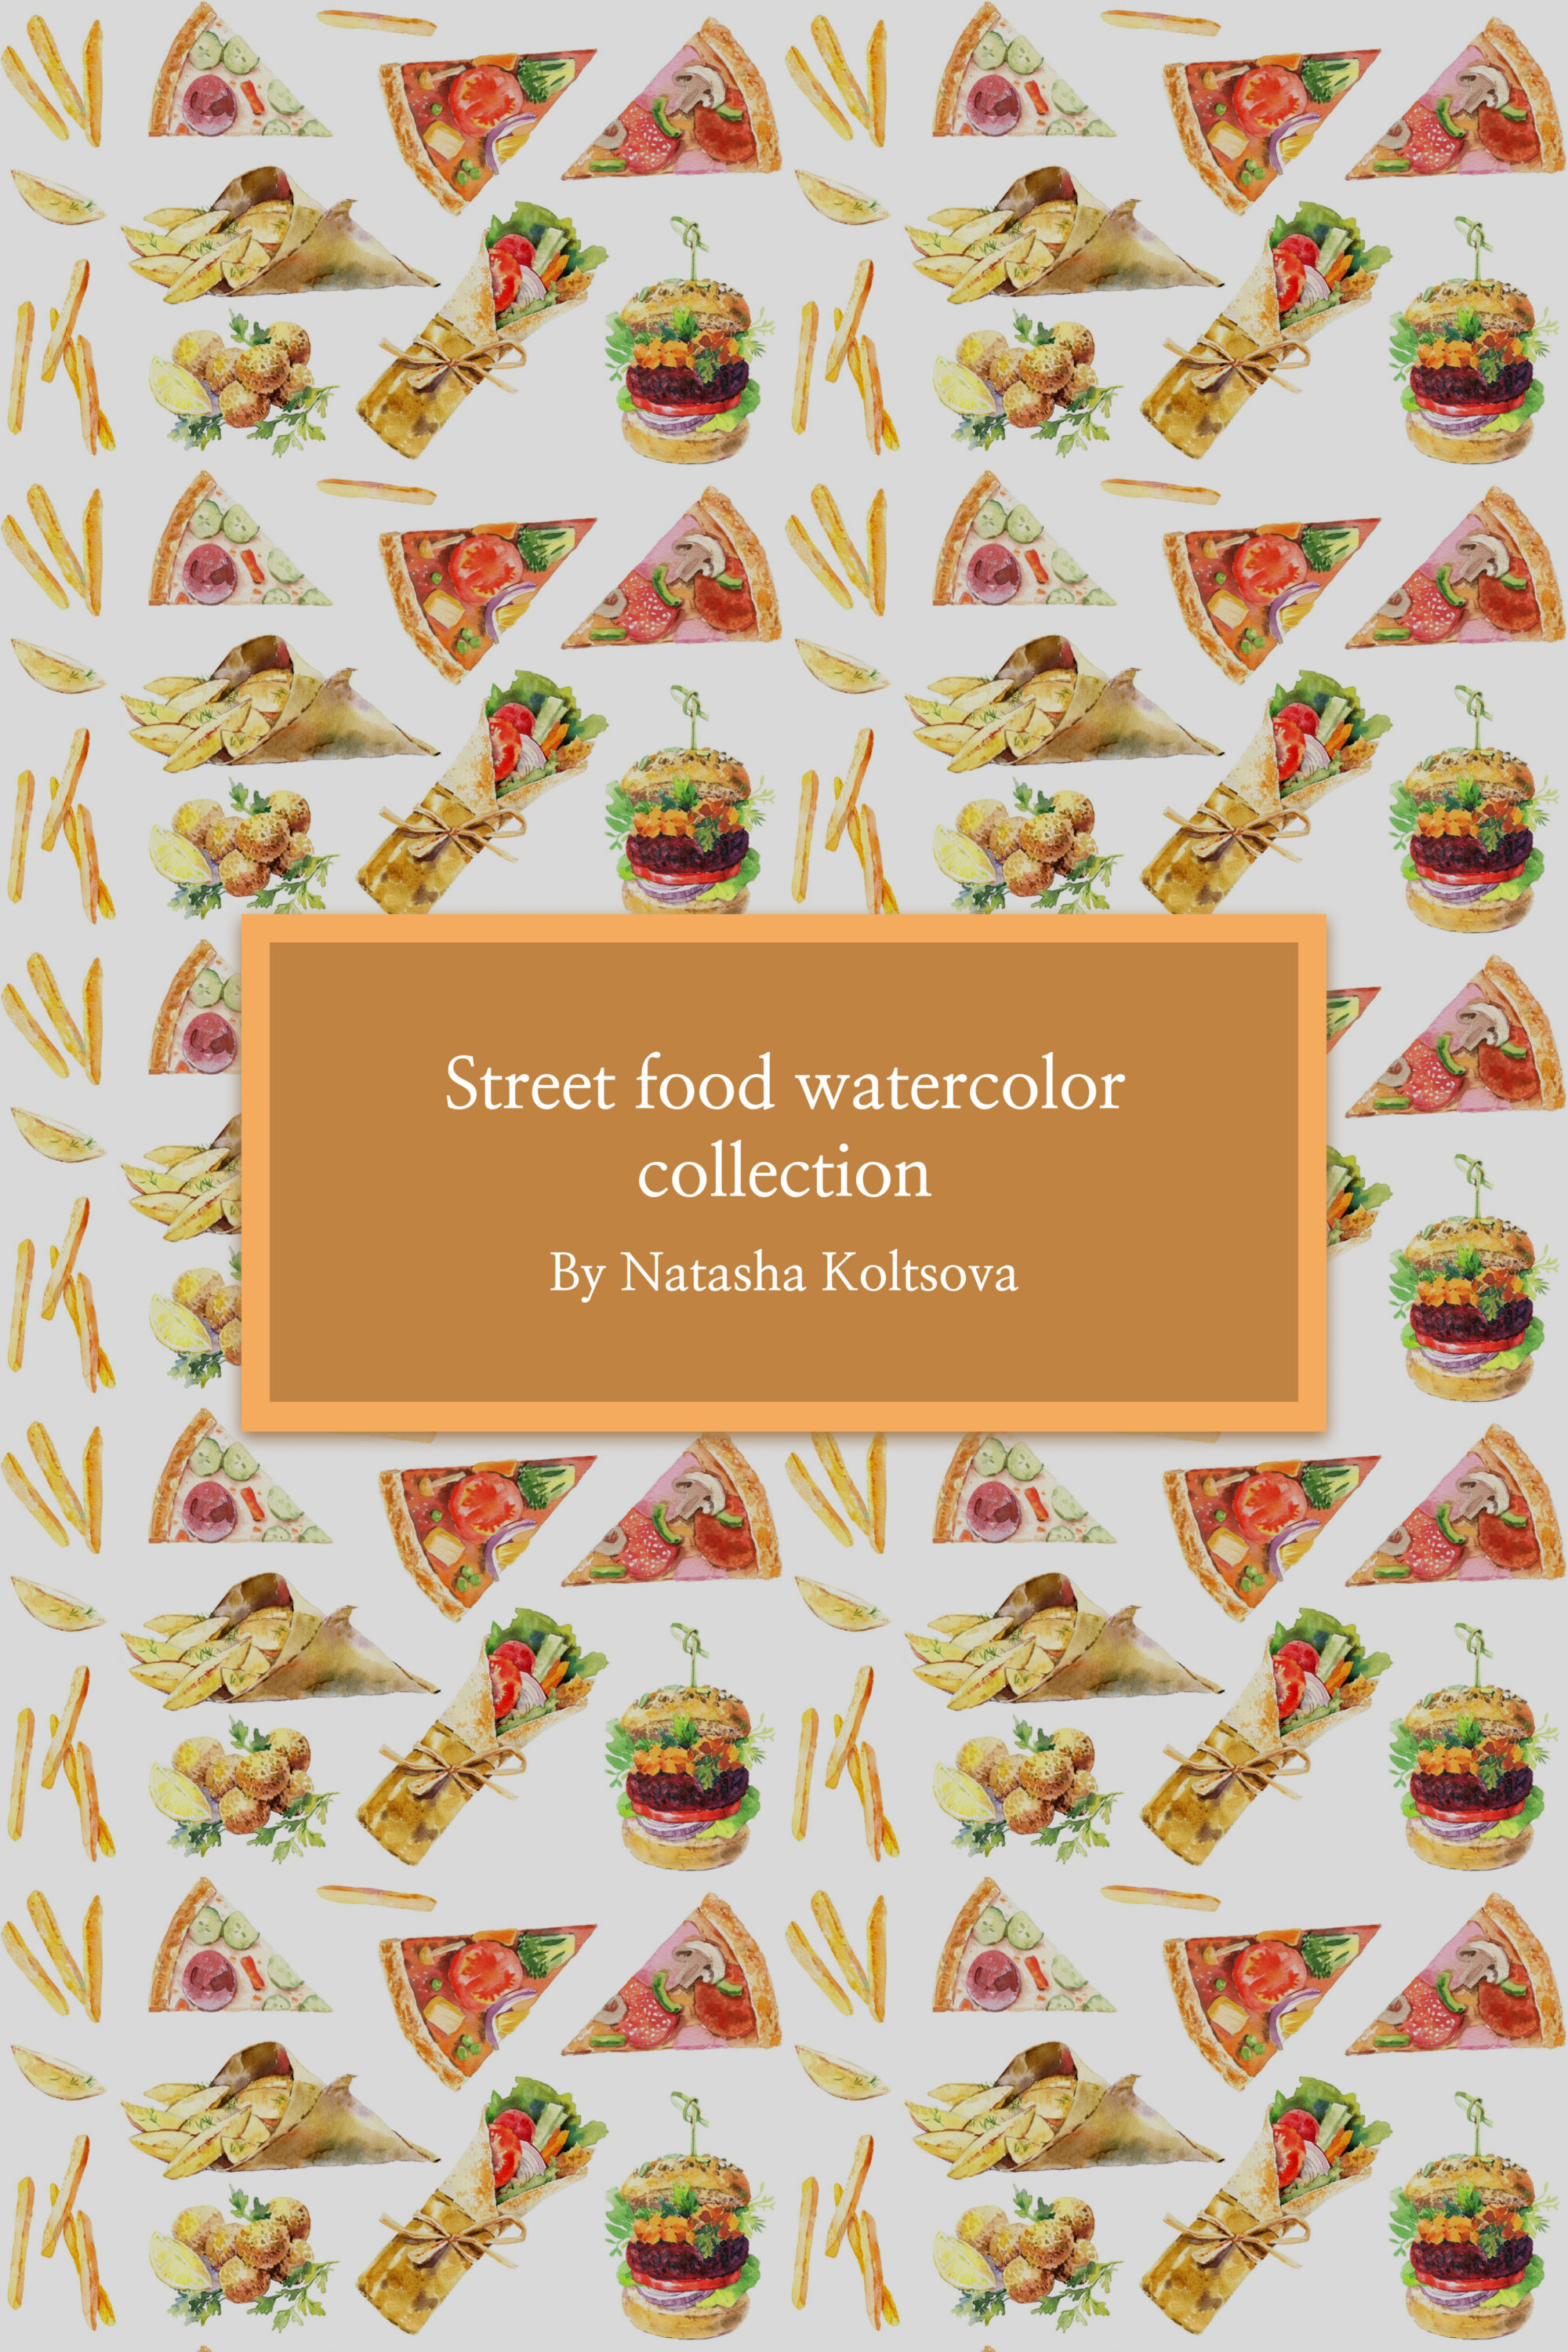 Street food watercolor collection of pinterest.